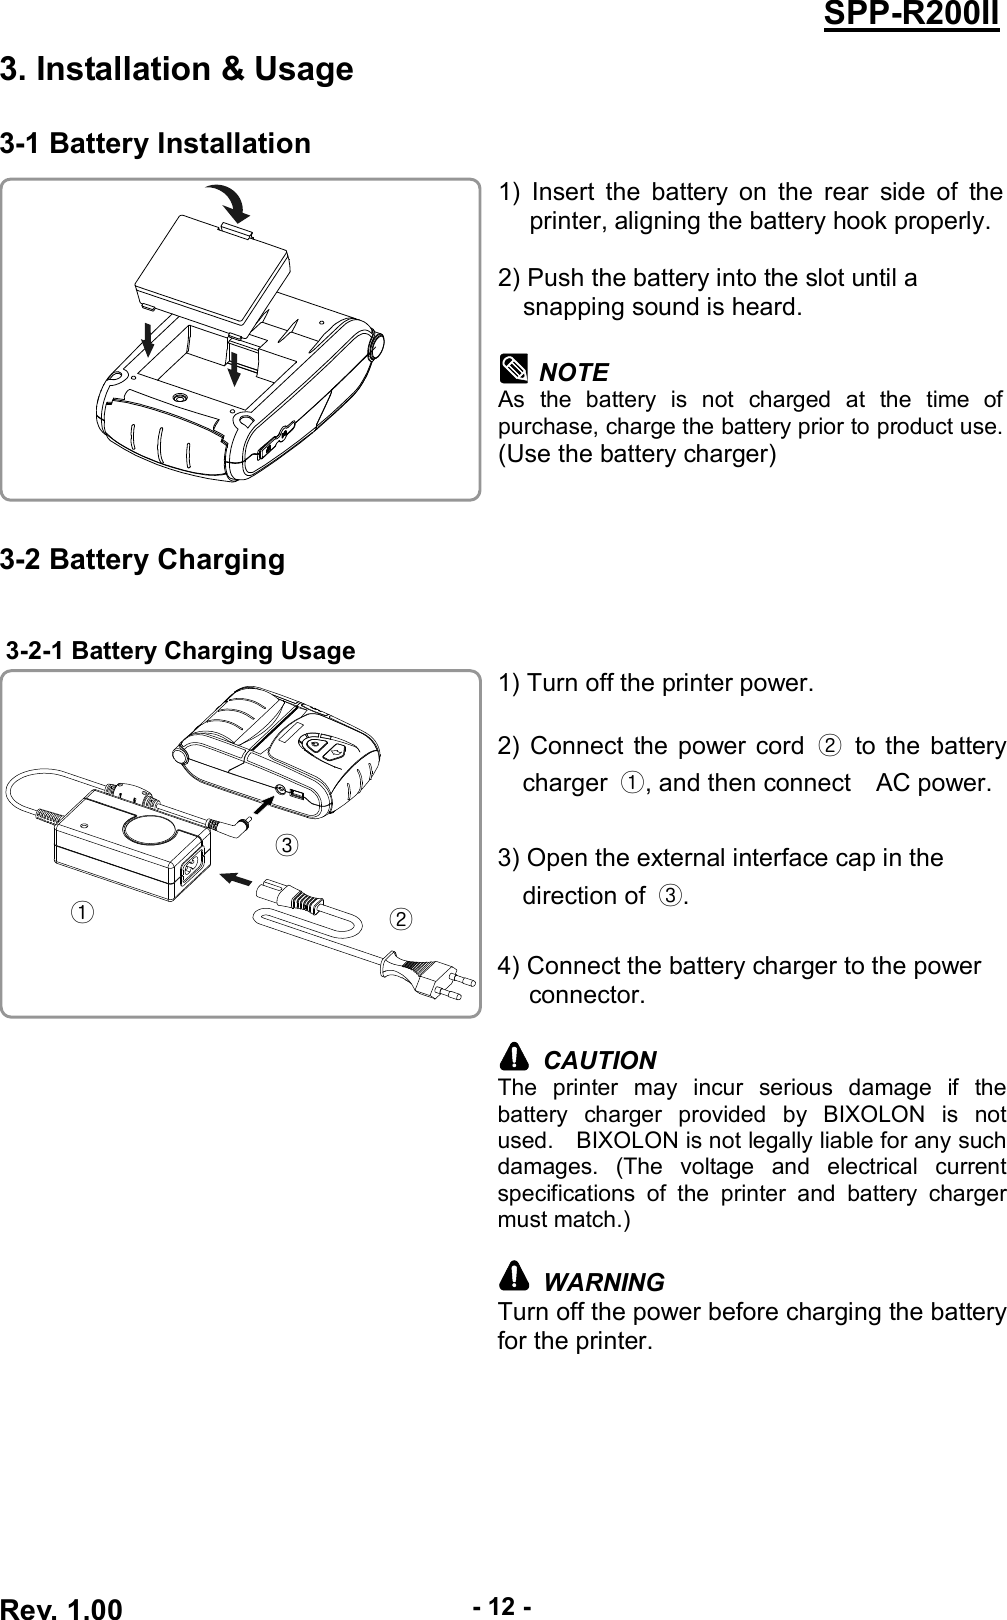  Rev. 1.00 - 12 - SPP-R200II 3. Installation &amp; Usage 3-1 Battery Installation  1)  Insert  the  battery  on  the  rear  side  of  the printer, aligning the battery hook properly.  2) Push the battery into the slot until a   snapping sound is heard.  NOTE As  the  battery  is  not  charged  at  the  time  of purchase, charge the battery prior to product use. (Use the battery charger)  3-2 Battery Charging  3-2-1 Battery Charging Usage  1) Turn off the printer power.  2) Connect the power cord  ②  to the battery charger  ①, and then connect    AC power.  3) Open the external interface cap in the   direction of  ③.  4) Connect the battery charger to the power connector.   CAUTION The  printer  may  incur  serious  damage  if  the battery  charger  provided  by  BIXOLON  is  not used.    BIXOLON is not legally liable for any such damages.  (The  voltage  and  electrical  current specifications  of  the  printer  and  battery  charger must match.)   WARNING Turn off the power before charging the battery for the printer.  ① ② ③ 